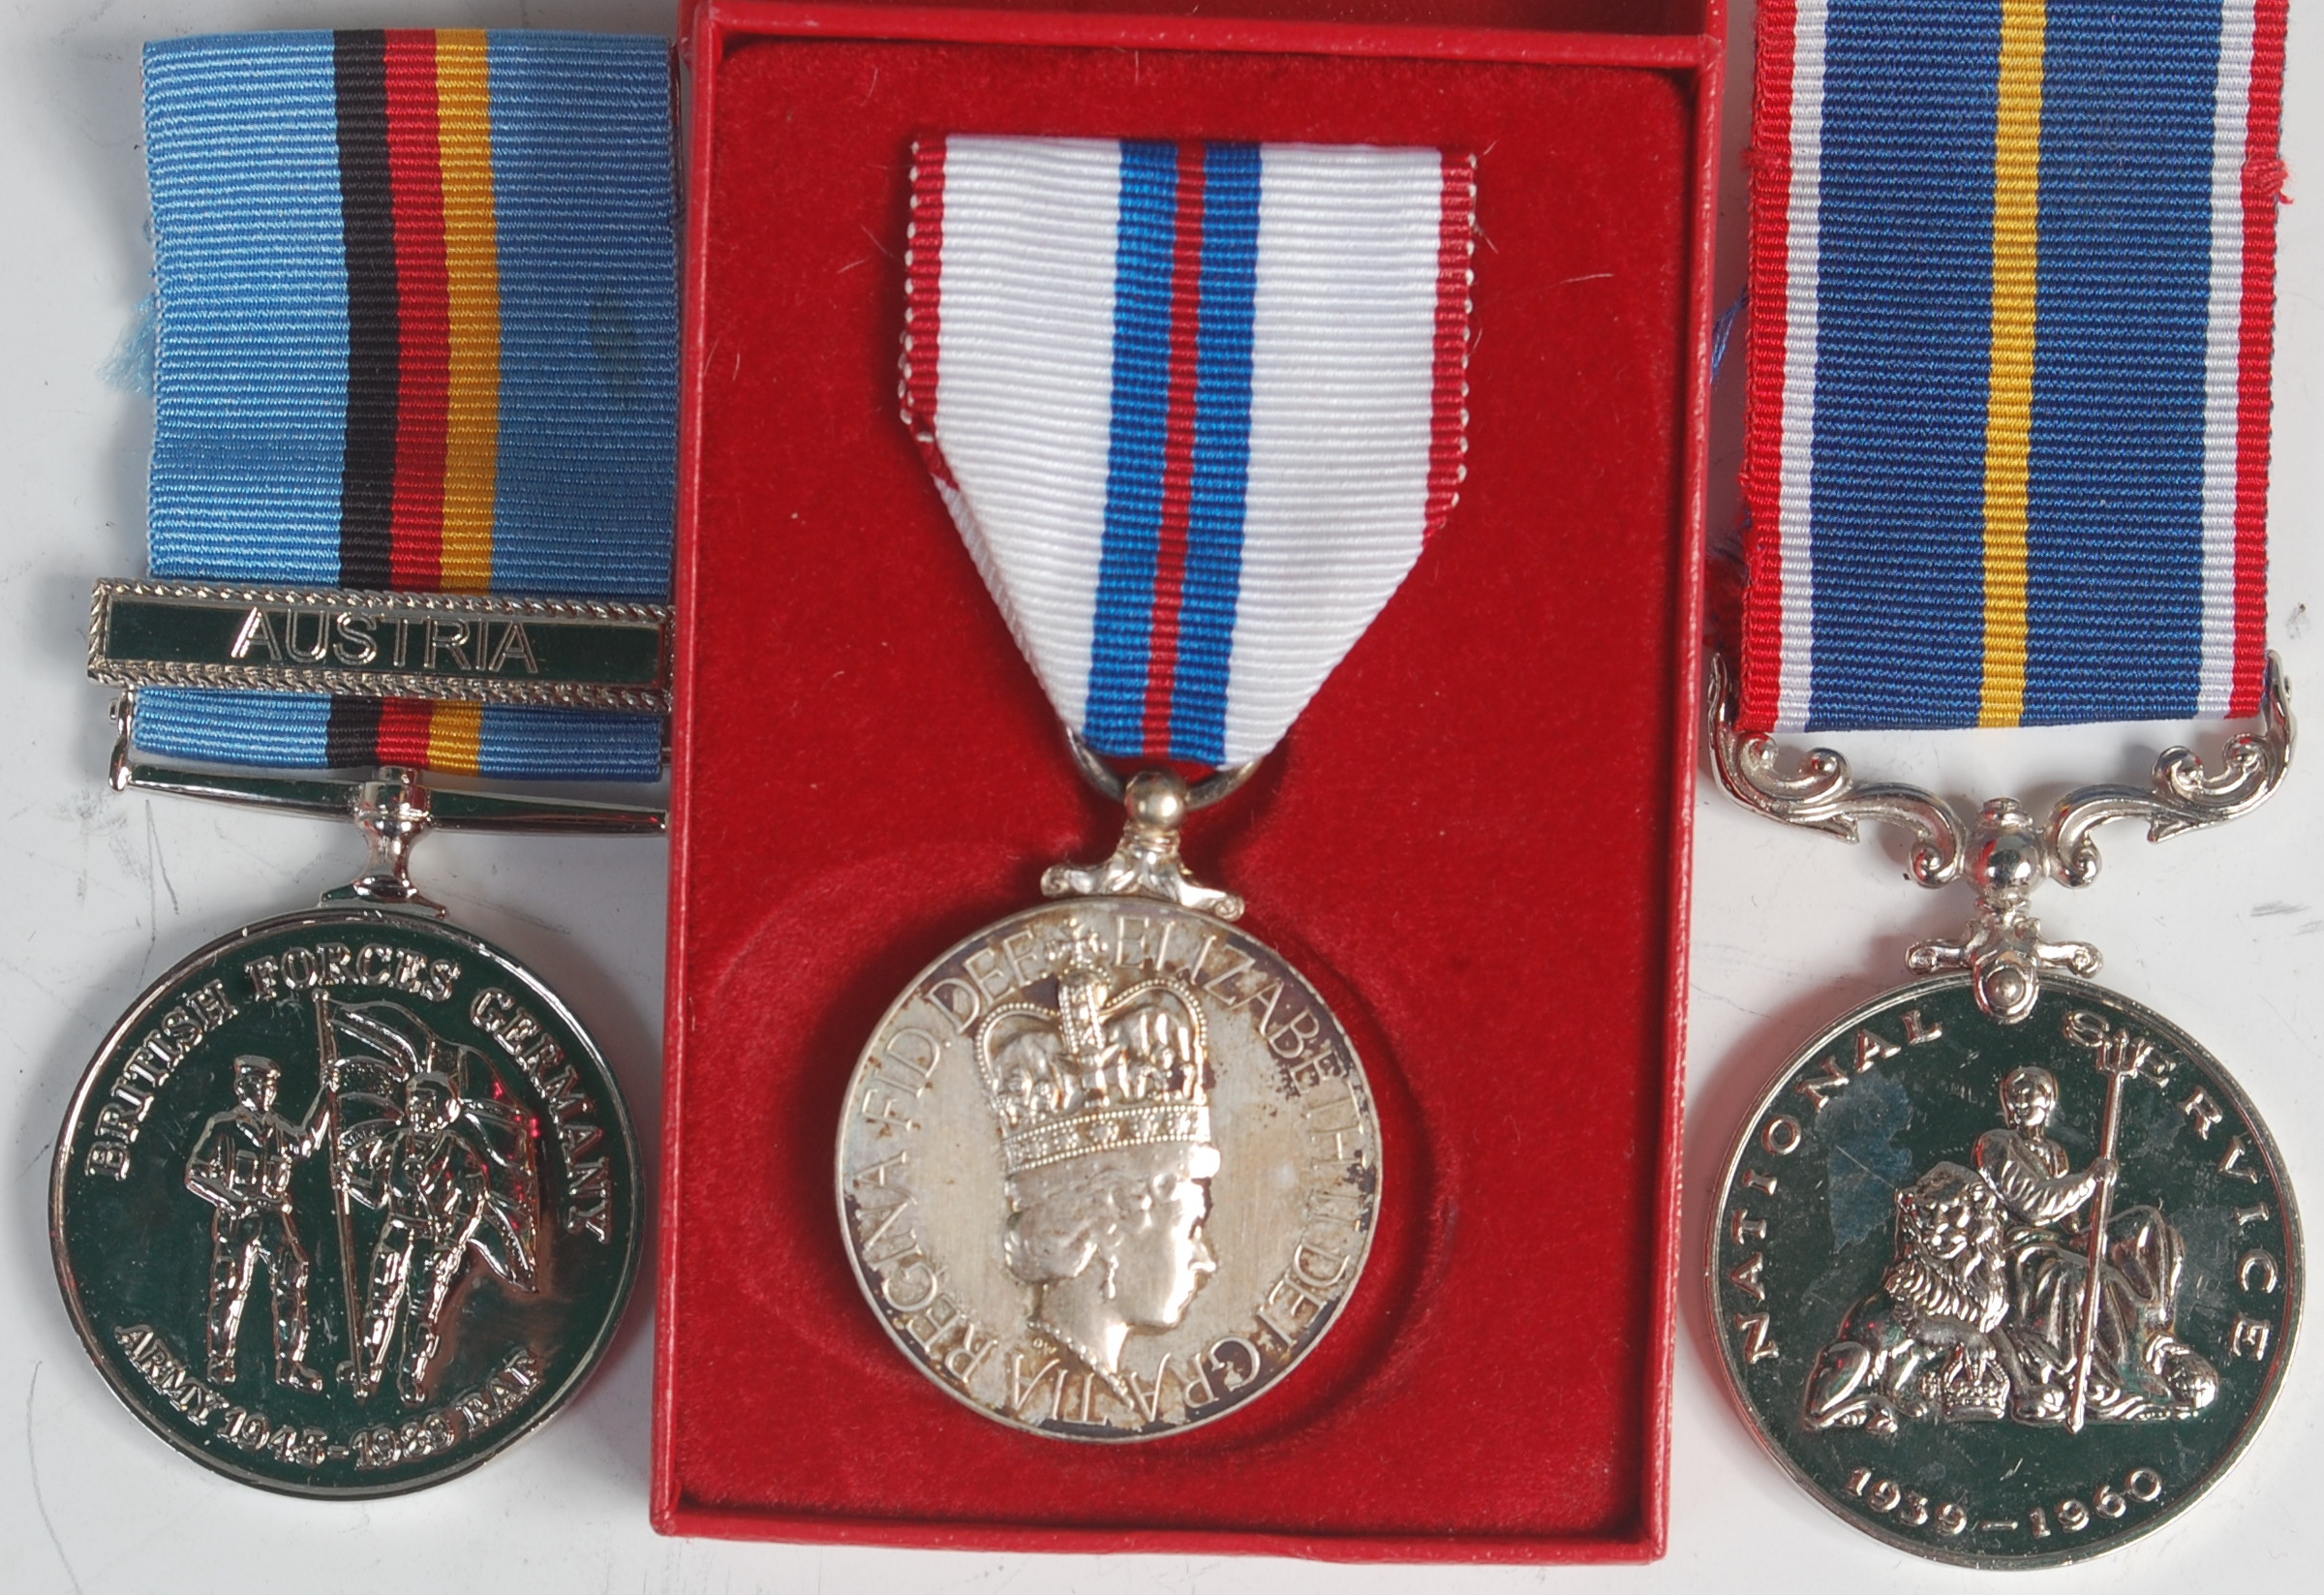 An Elizabeth II 1952-1977 Silver jubilee medal, awarded to Angus Wilson, boxed with supporting